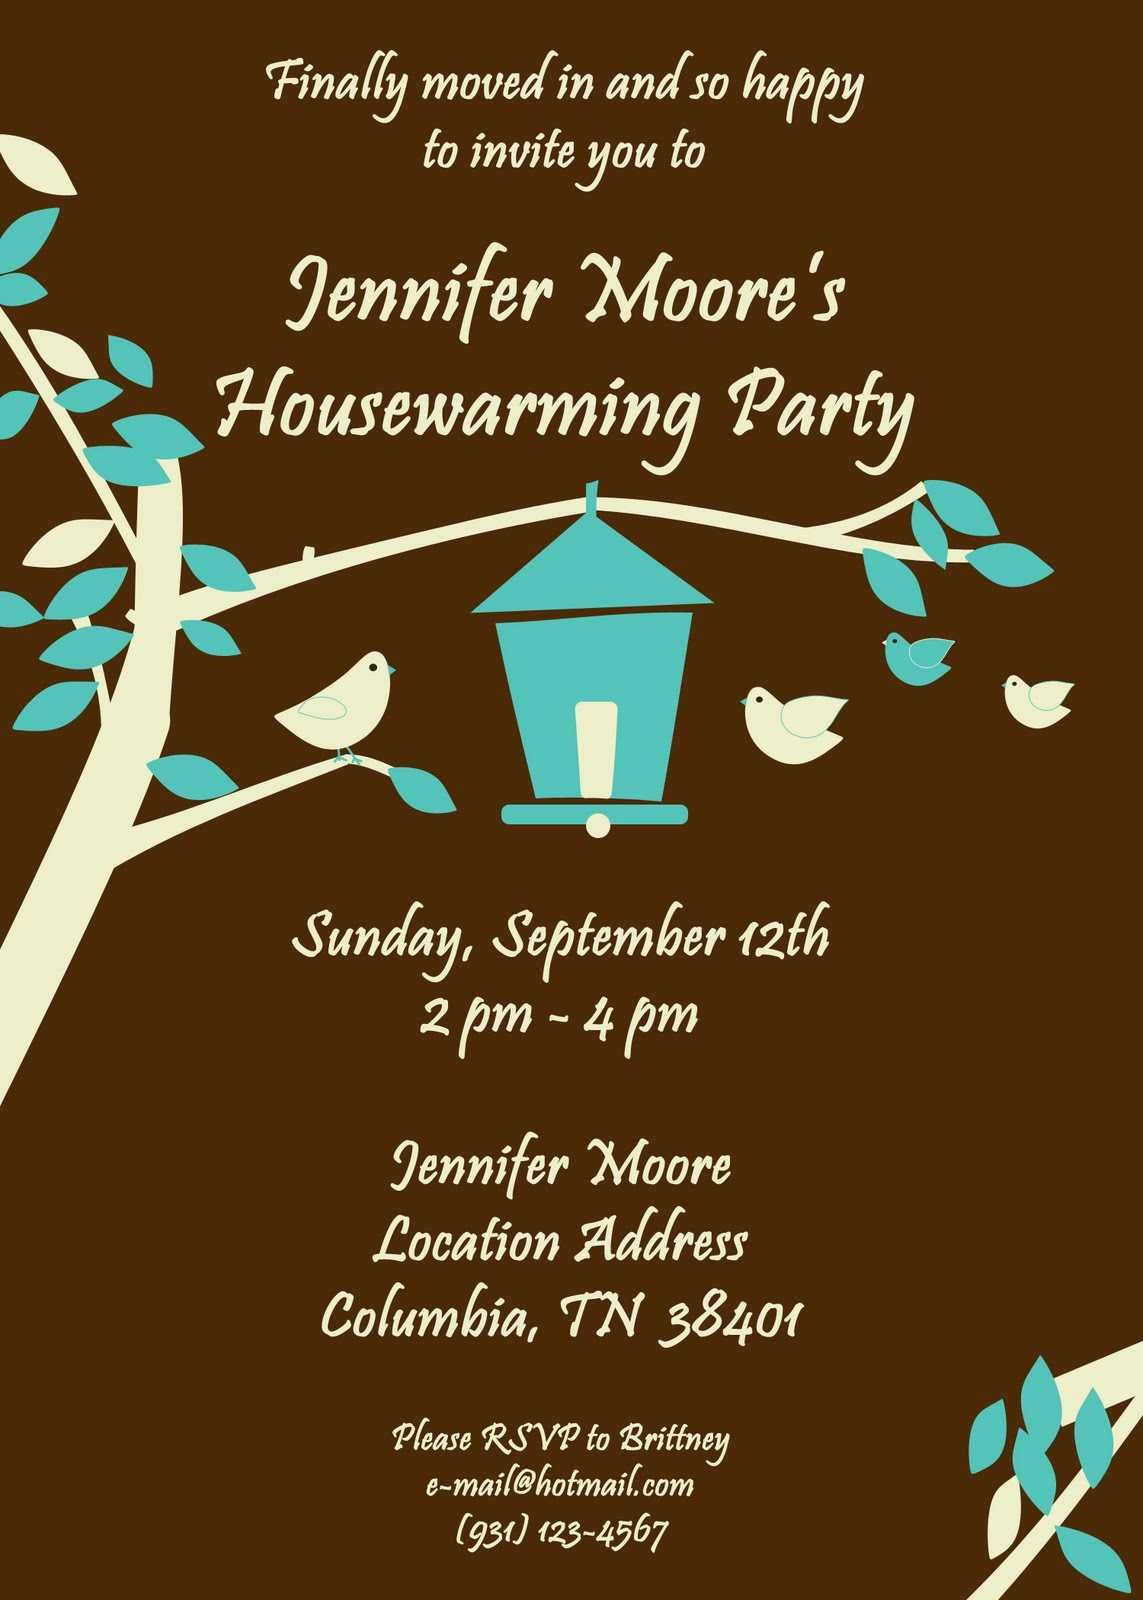 house-warming-ceremony-invitation-card-templates-business-template-ideas